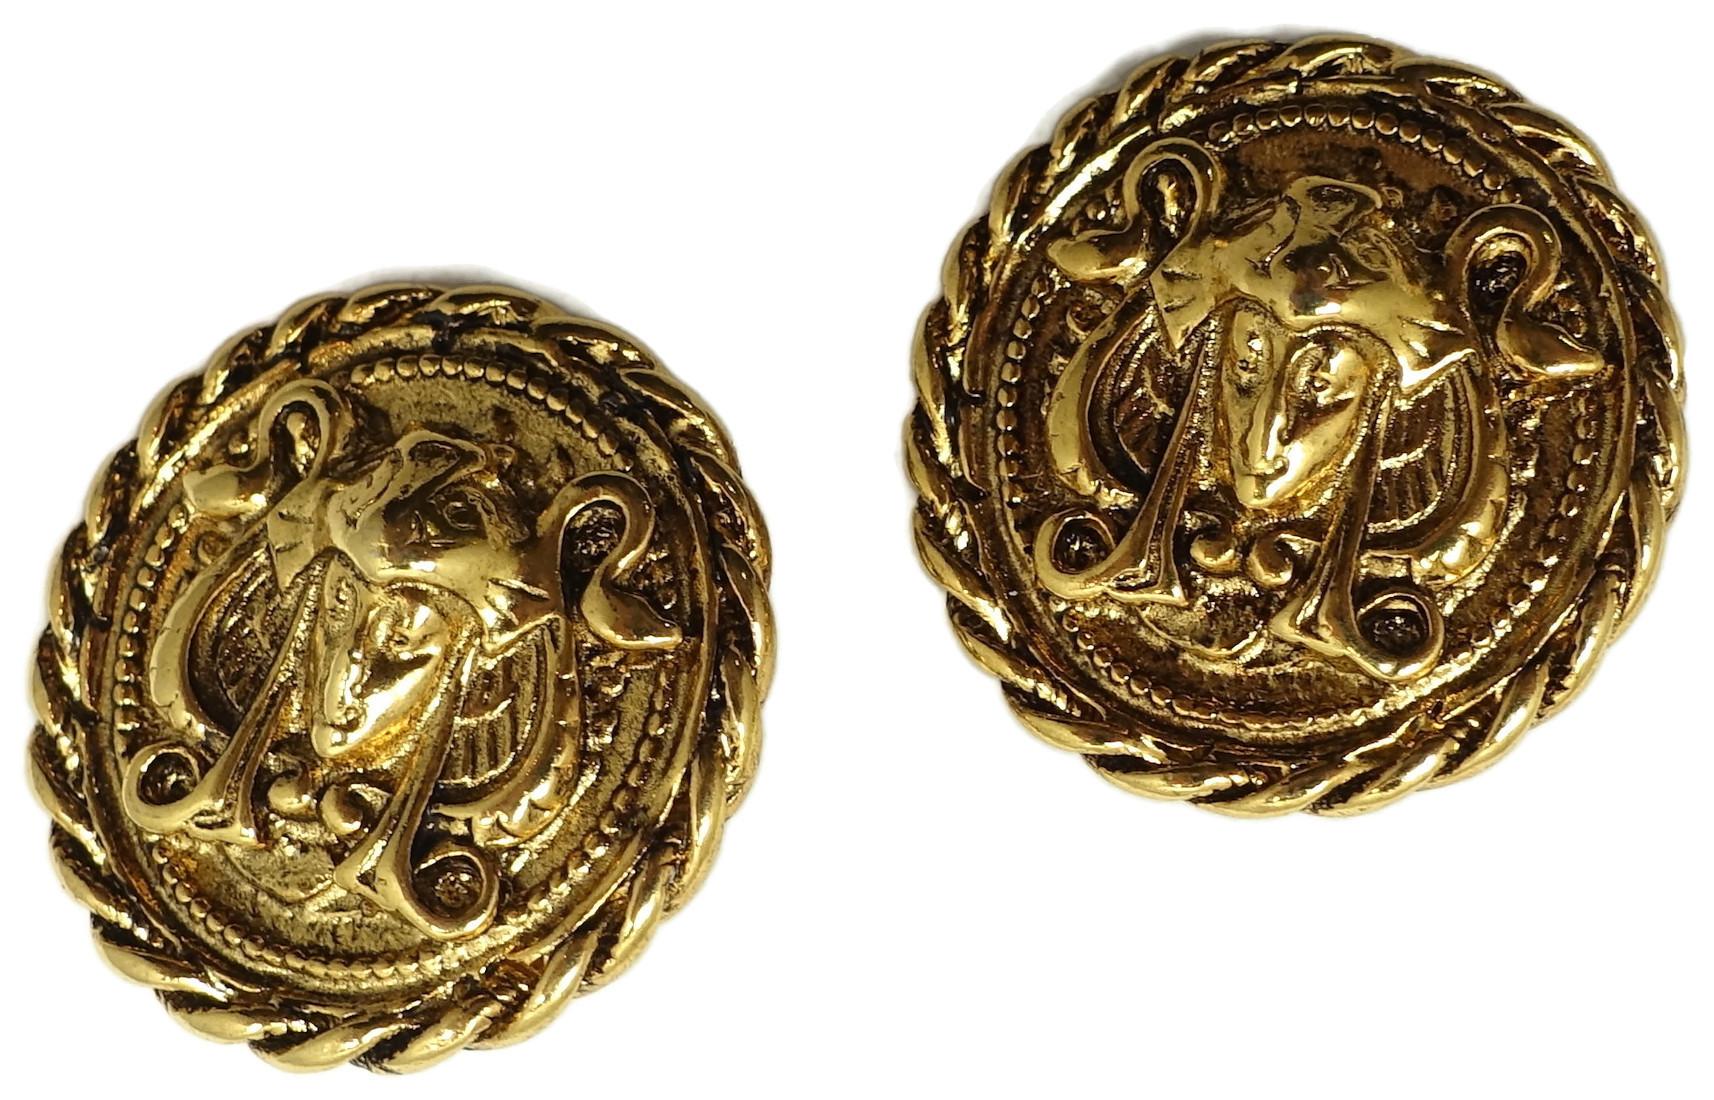 These vintage earrings feature a Medusa image carved into a gold tone metal setting.   In excellent condition, these clip earrings measure 1” across and are signed “Erwin Pearl”.